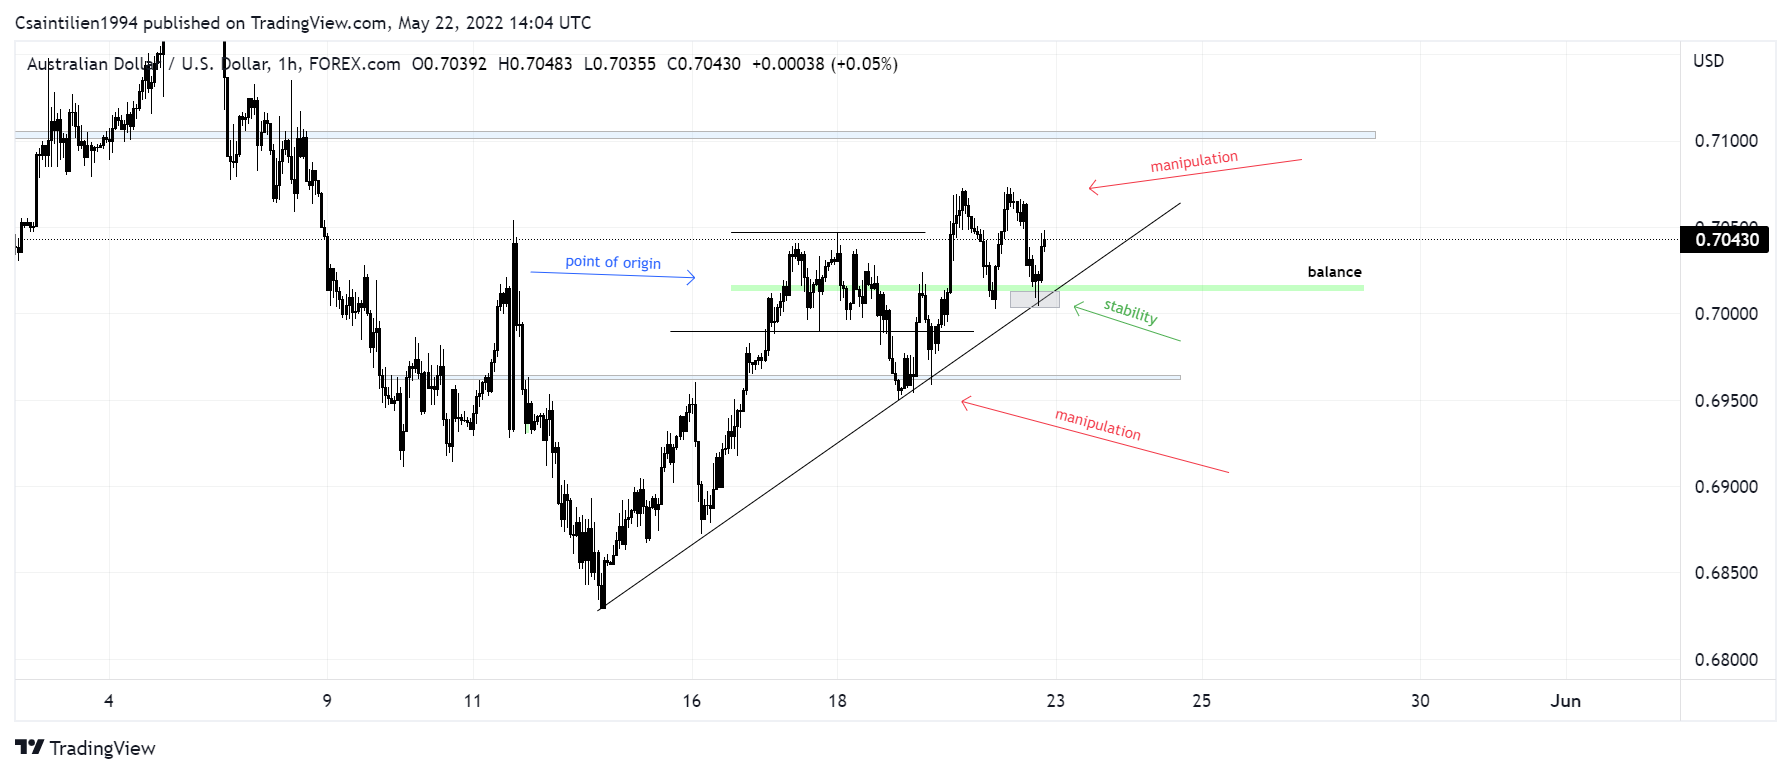 AUD/USD H1 Price action and market phases